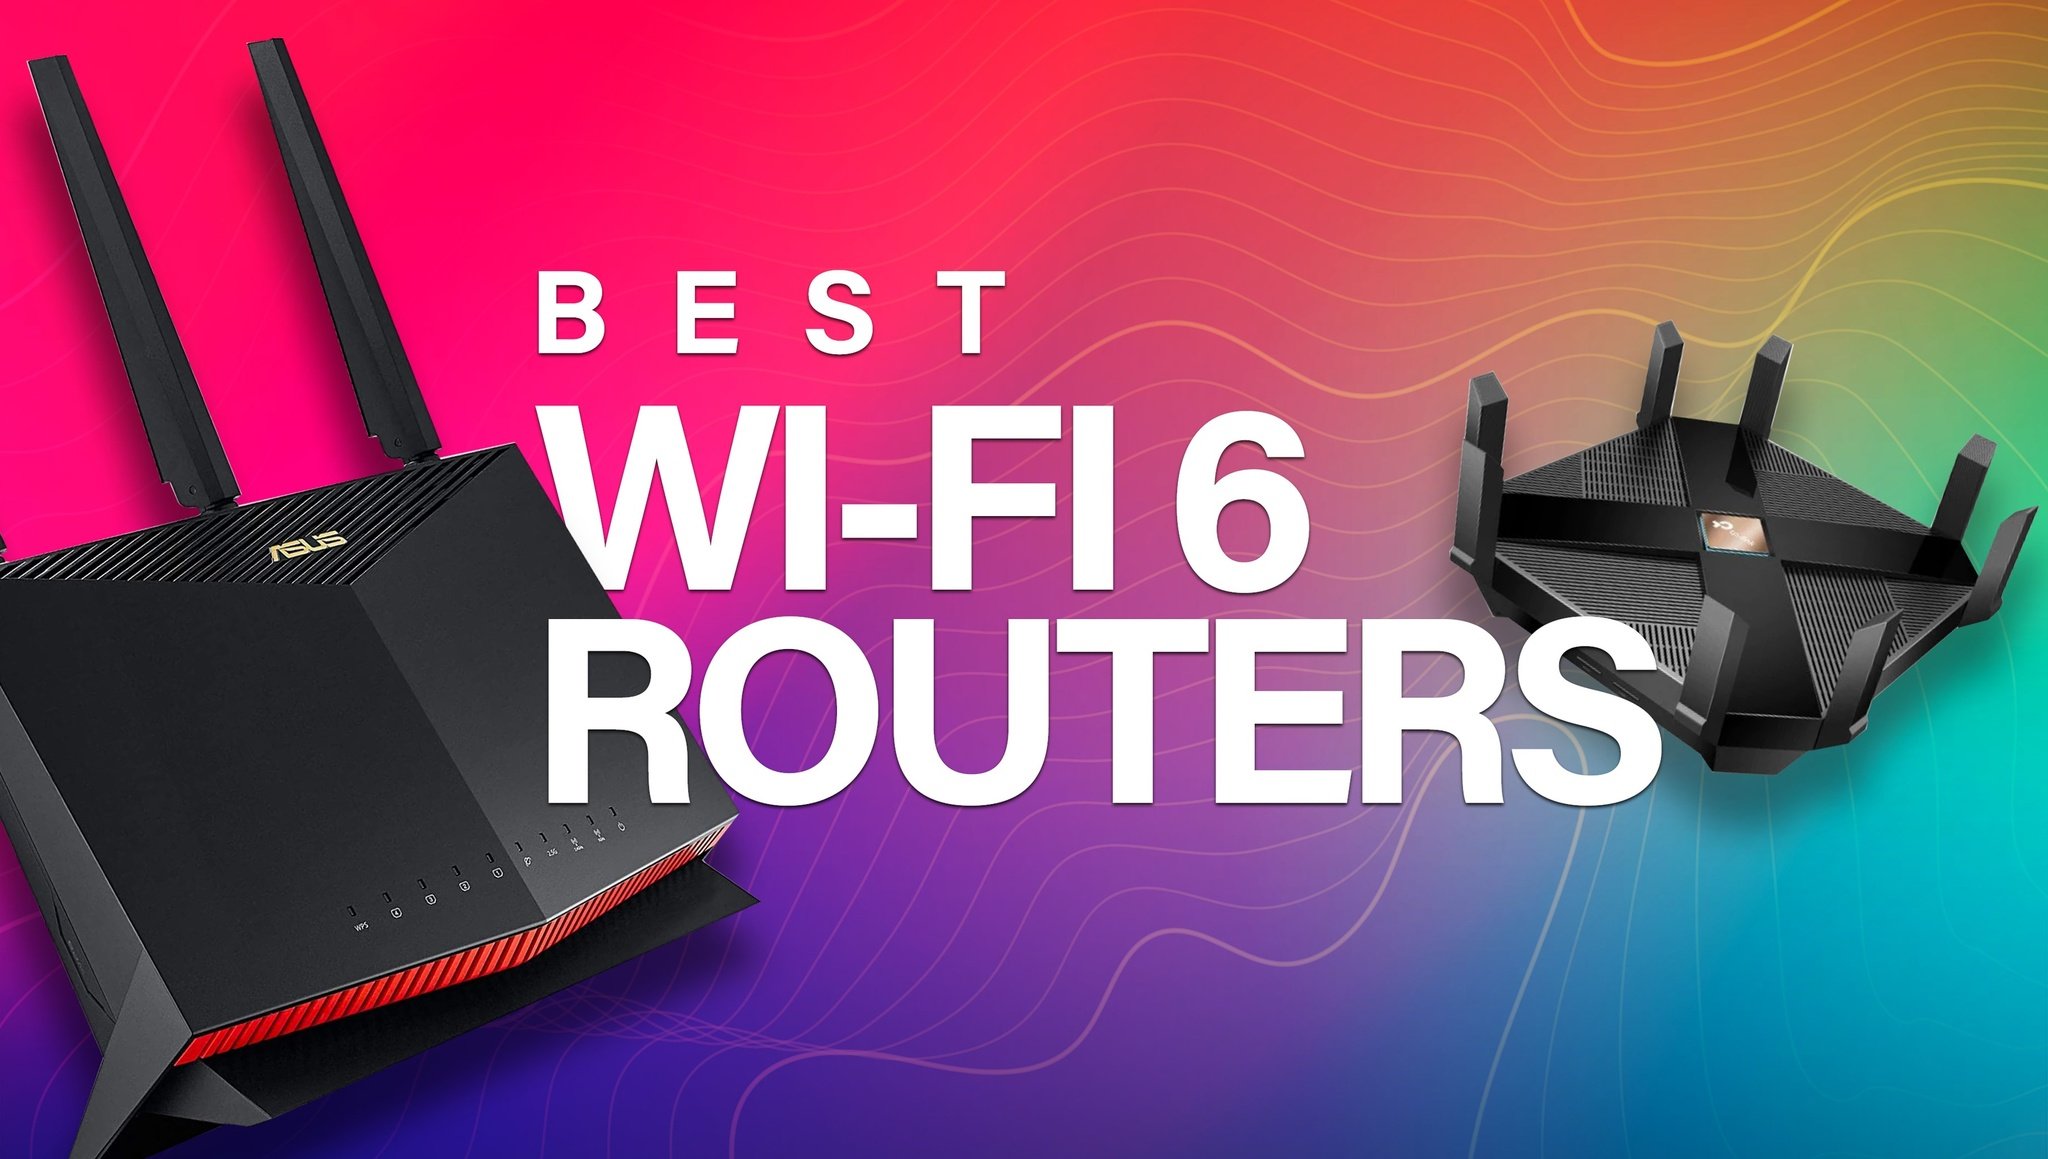 Best Wi-Fi 6 routers 2021